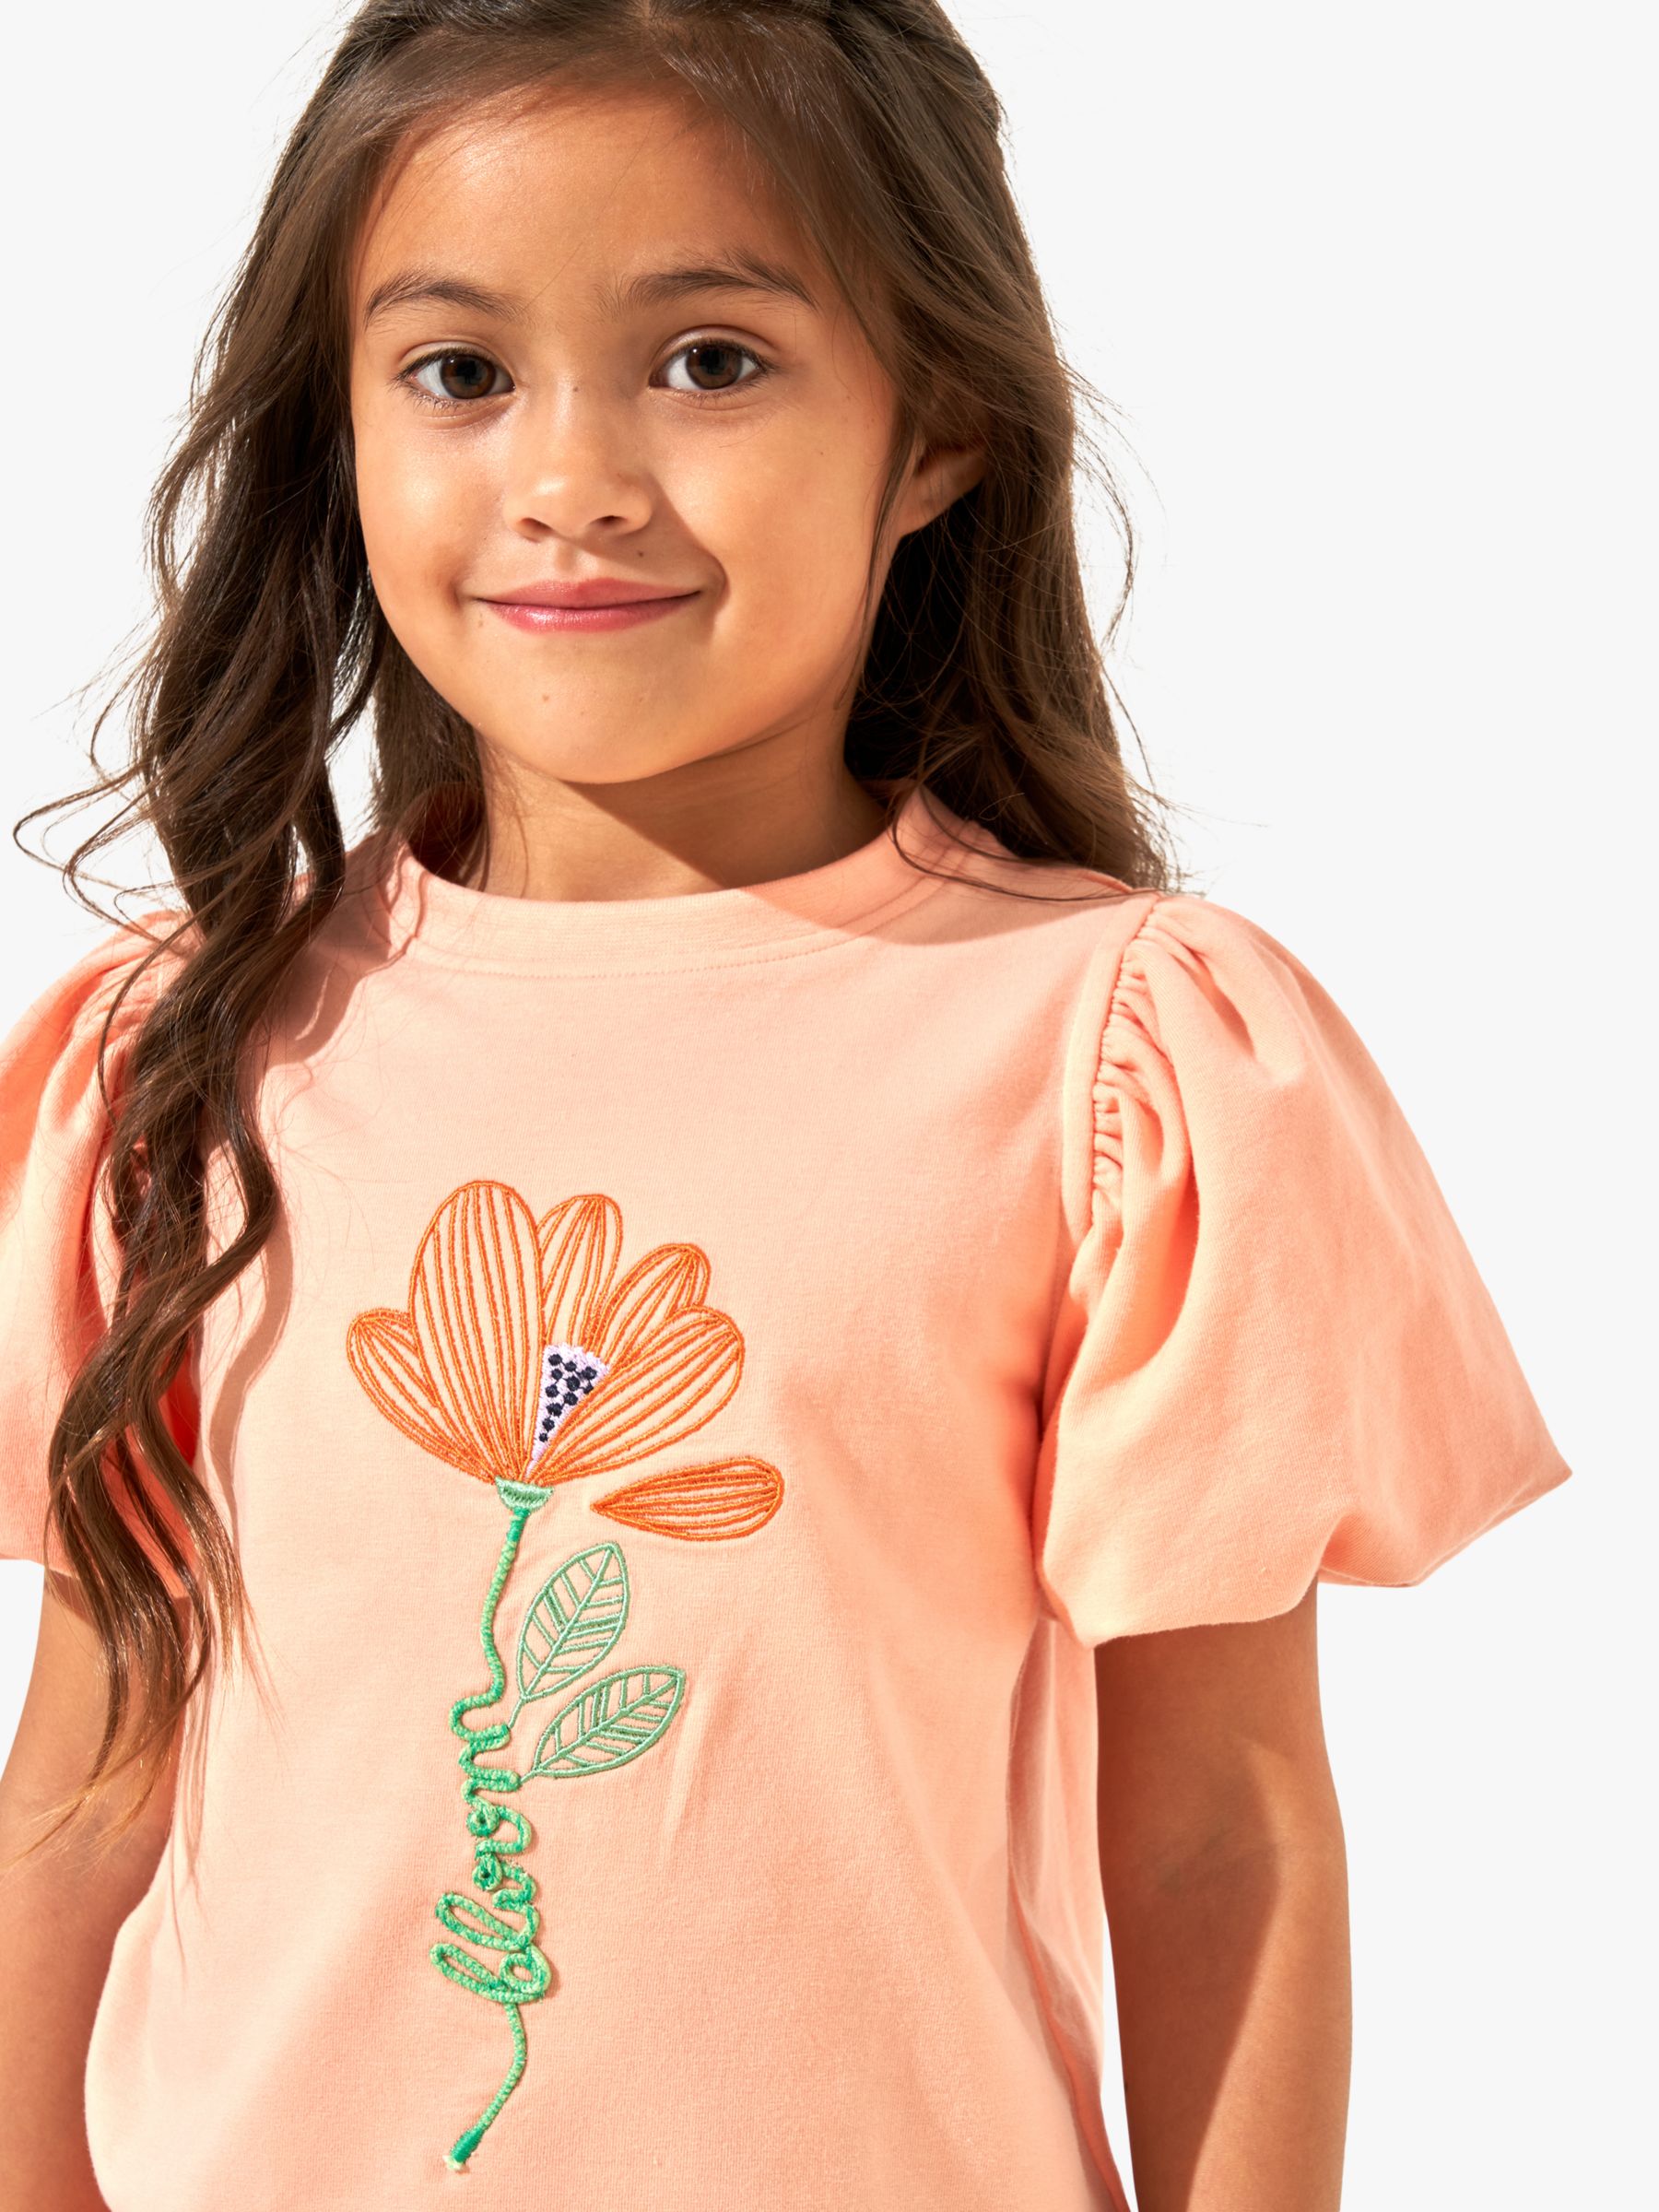 Angel & Rocket Kids' Embroidered Puff Sleeve Top, Apricot, 9-10 years